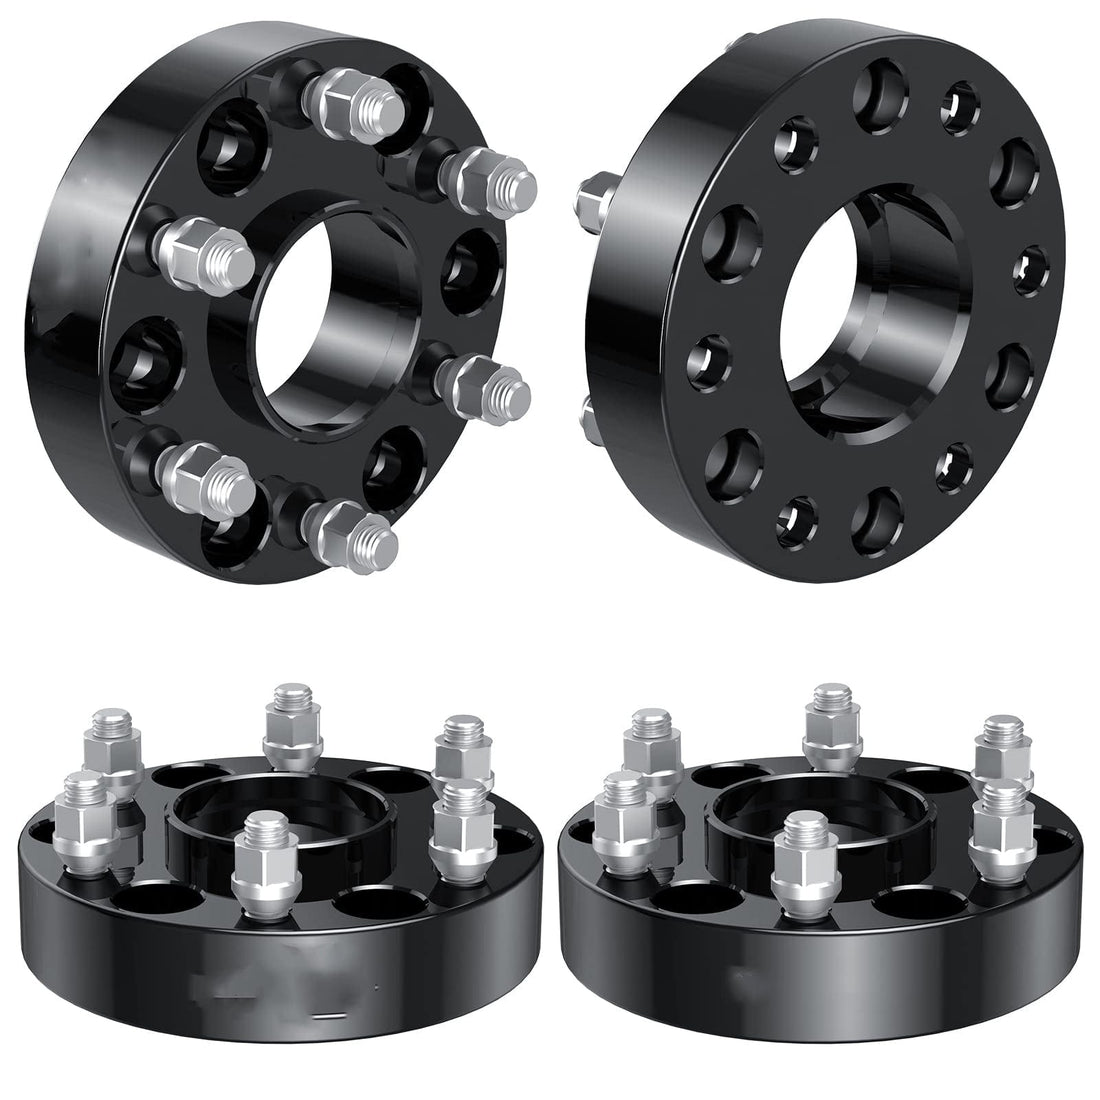 1.5 Inch Hub Centric Wheel Spacers M12x1.5, 6x5.5 for Tacoma